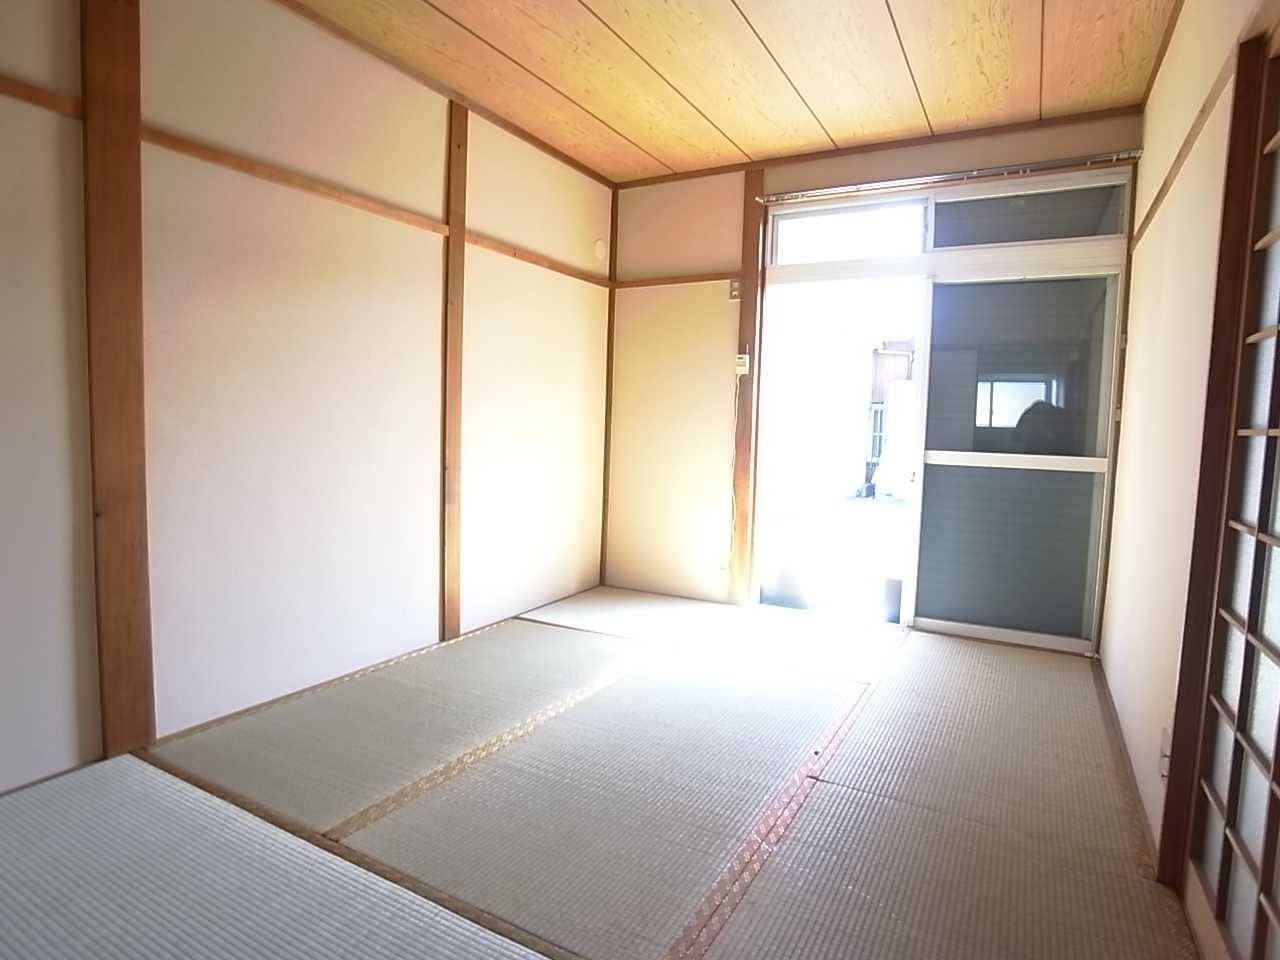 Living and room. It is a sunny Japanese-style